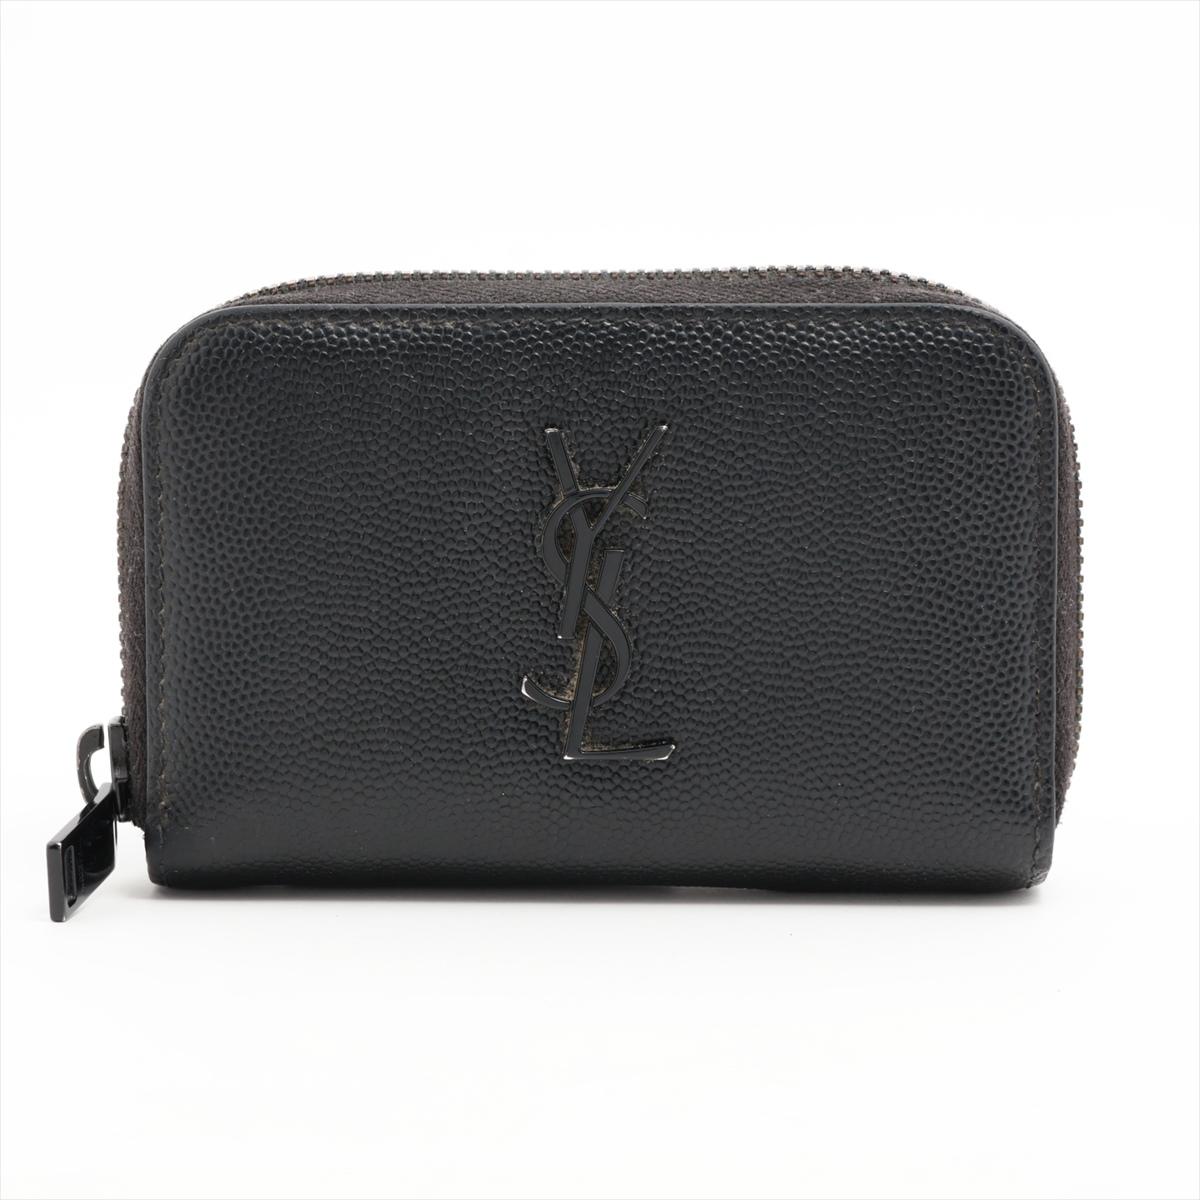 The Saint Laurent Paris YSL Leather Coin Case in Black is a sleek and sophisticated accessory that effortlessly combines luxury and practicality. Crafted with meticulous attention to detail, the case features smooth black leather, exemplifying